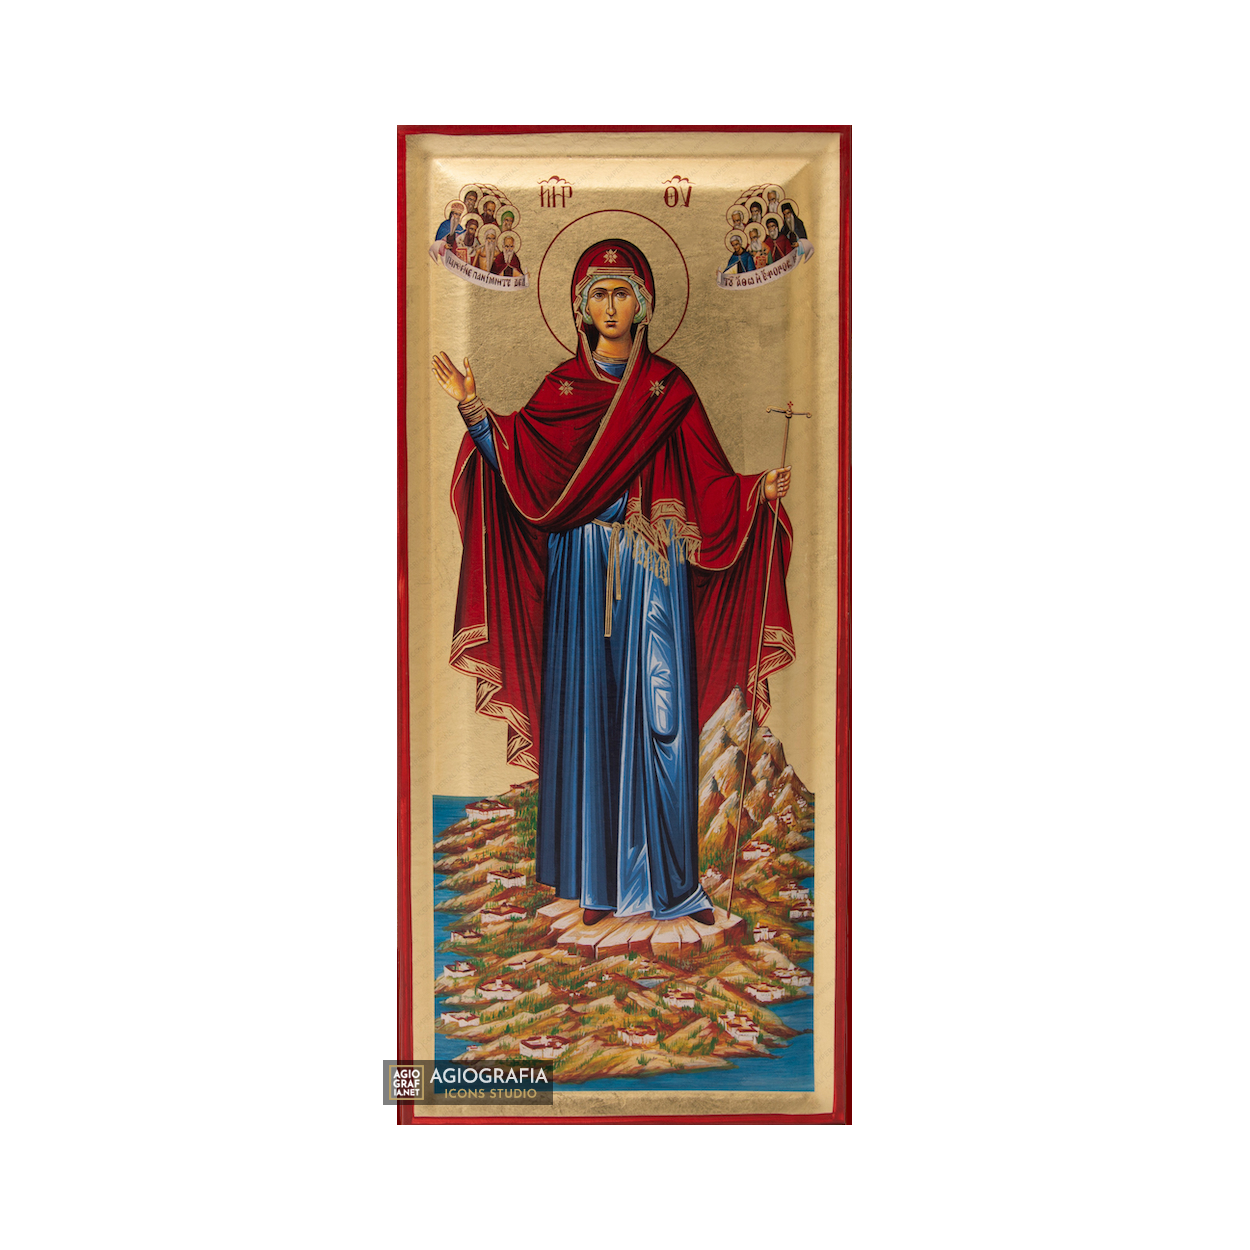 Virgin Mary of Mount Athos Greek Orthodox Wood Icon with Gold Leaf